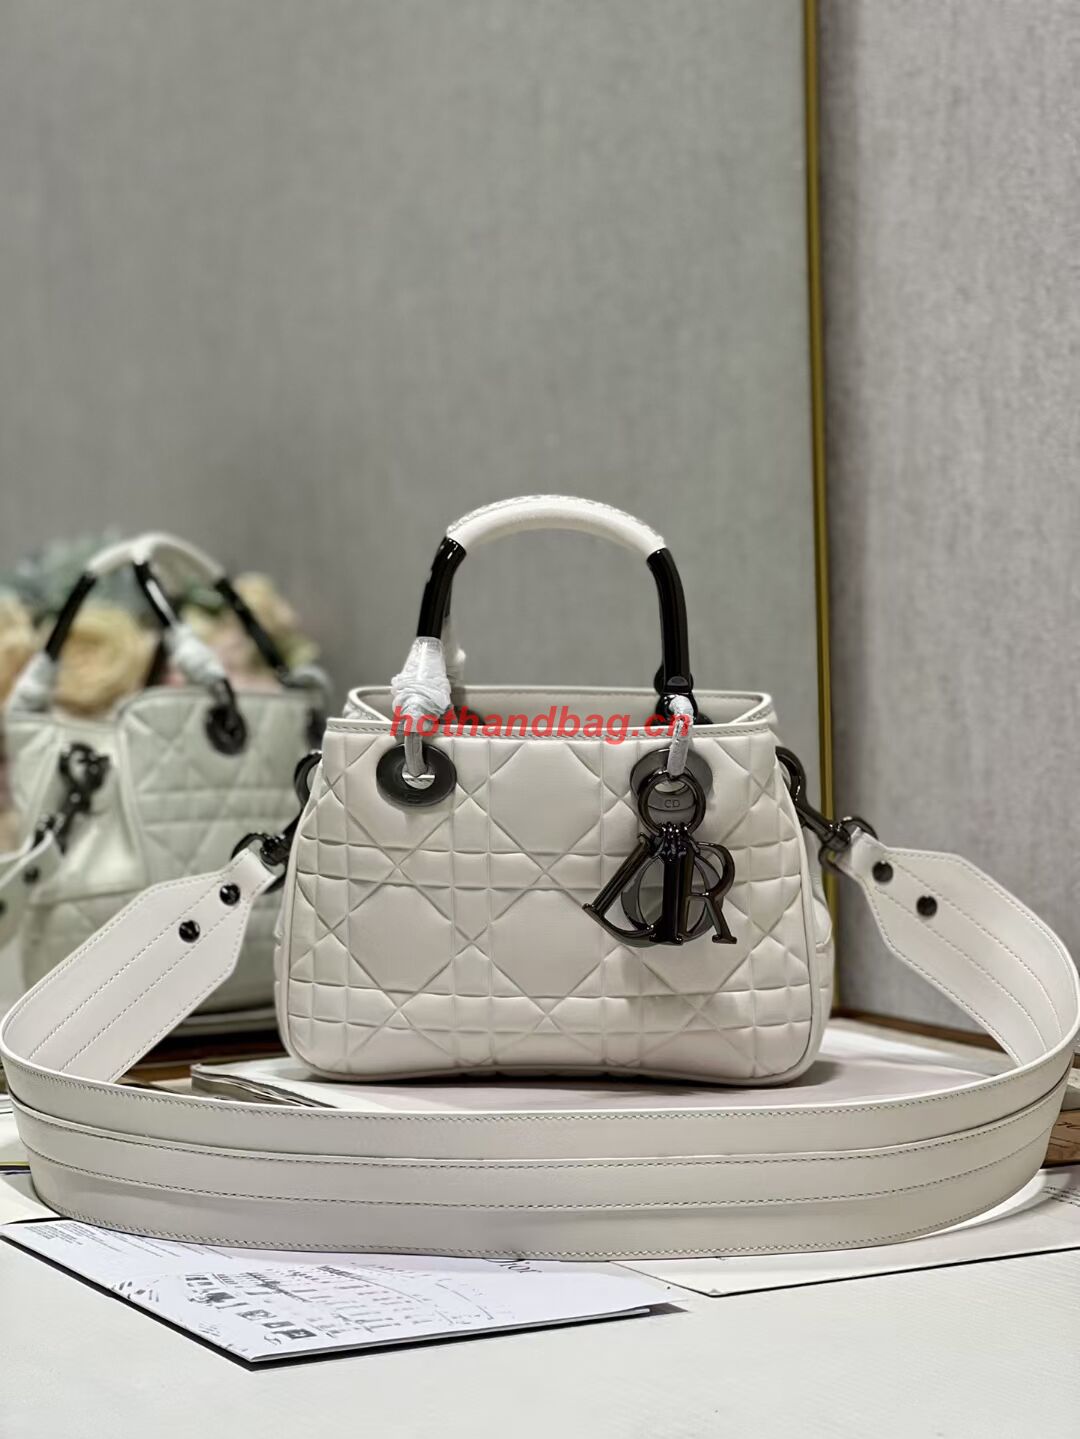 LADY DIOR TOP HANDLE SMALL BAG Latte Cannage Lambskin C9228 WHITE&BLACK